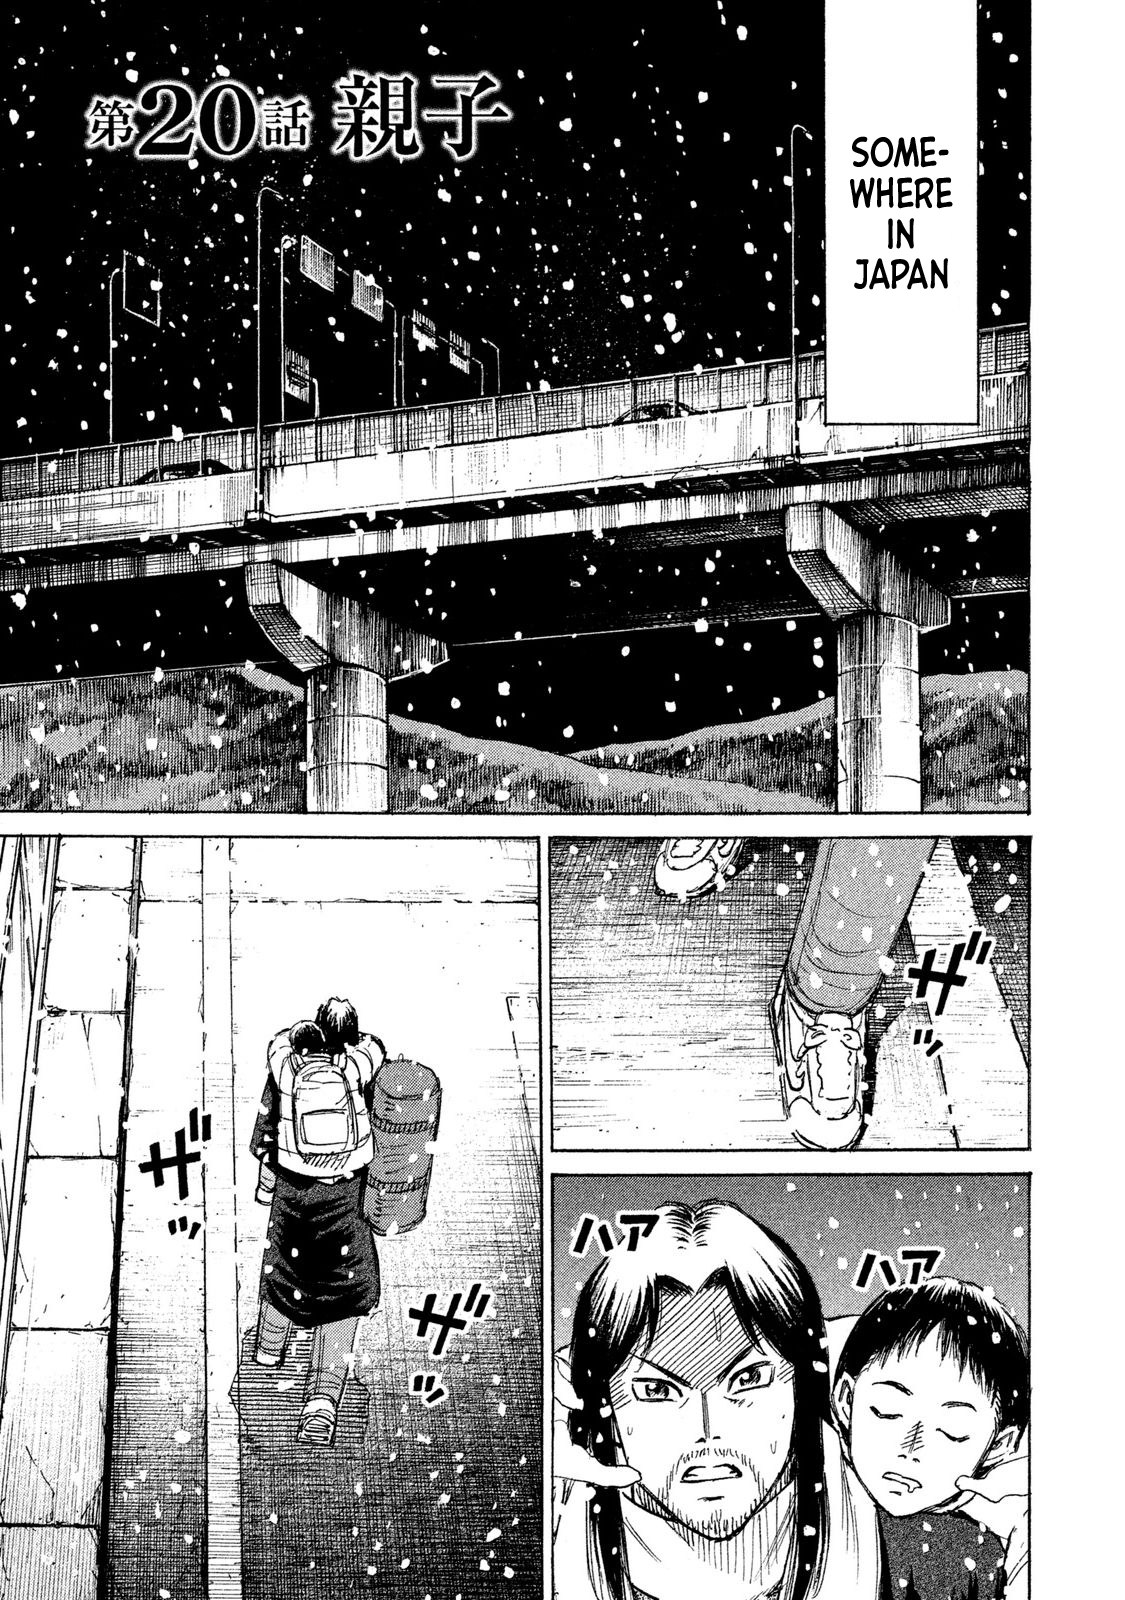 Higanjima - 48 Days Later Vol.3 Chapter 20: A Father And Son - Picture 2